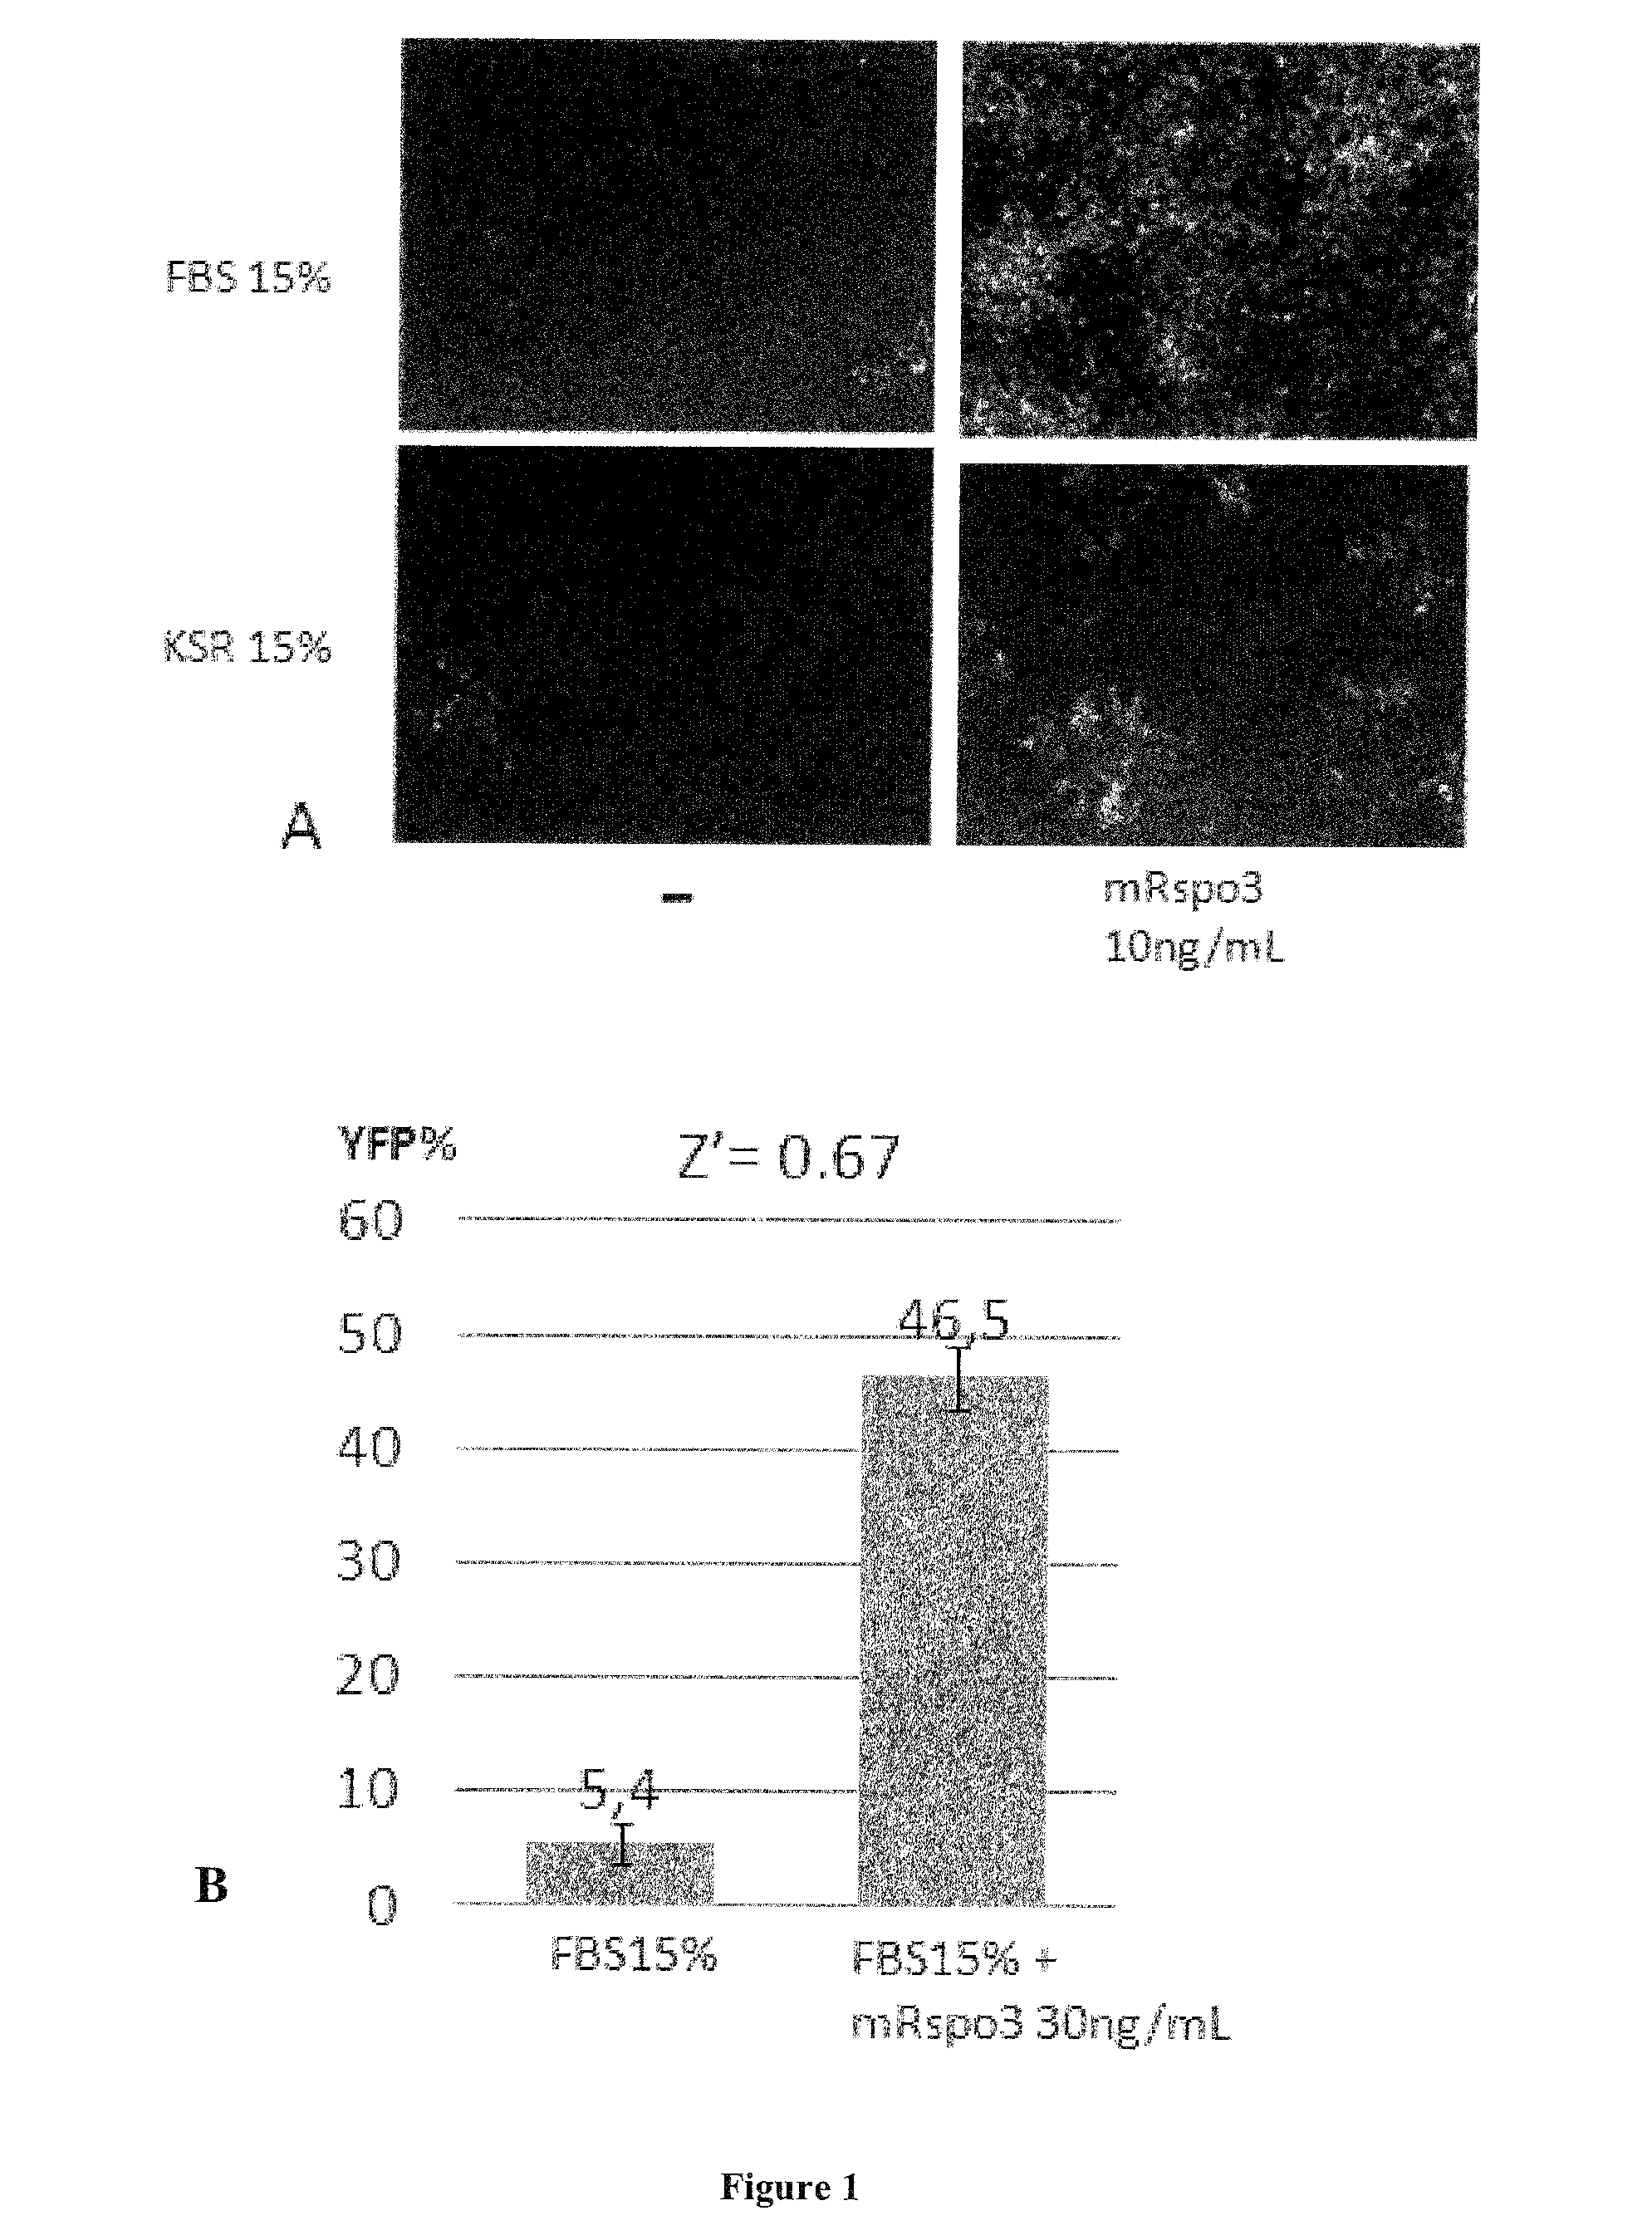 Method for preparing induced paraxial mesoderm progenitor (IPAM) cells and their use